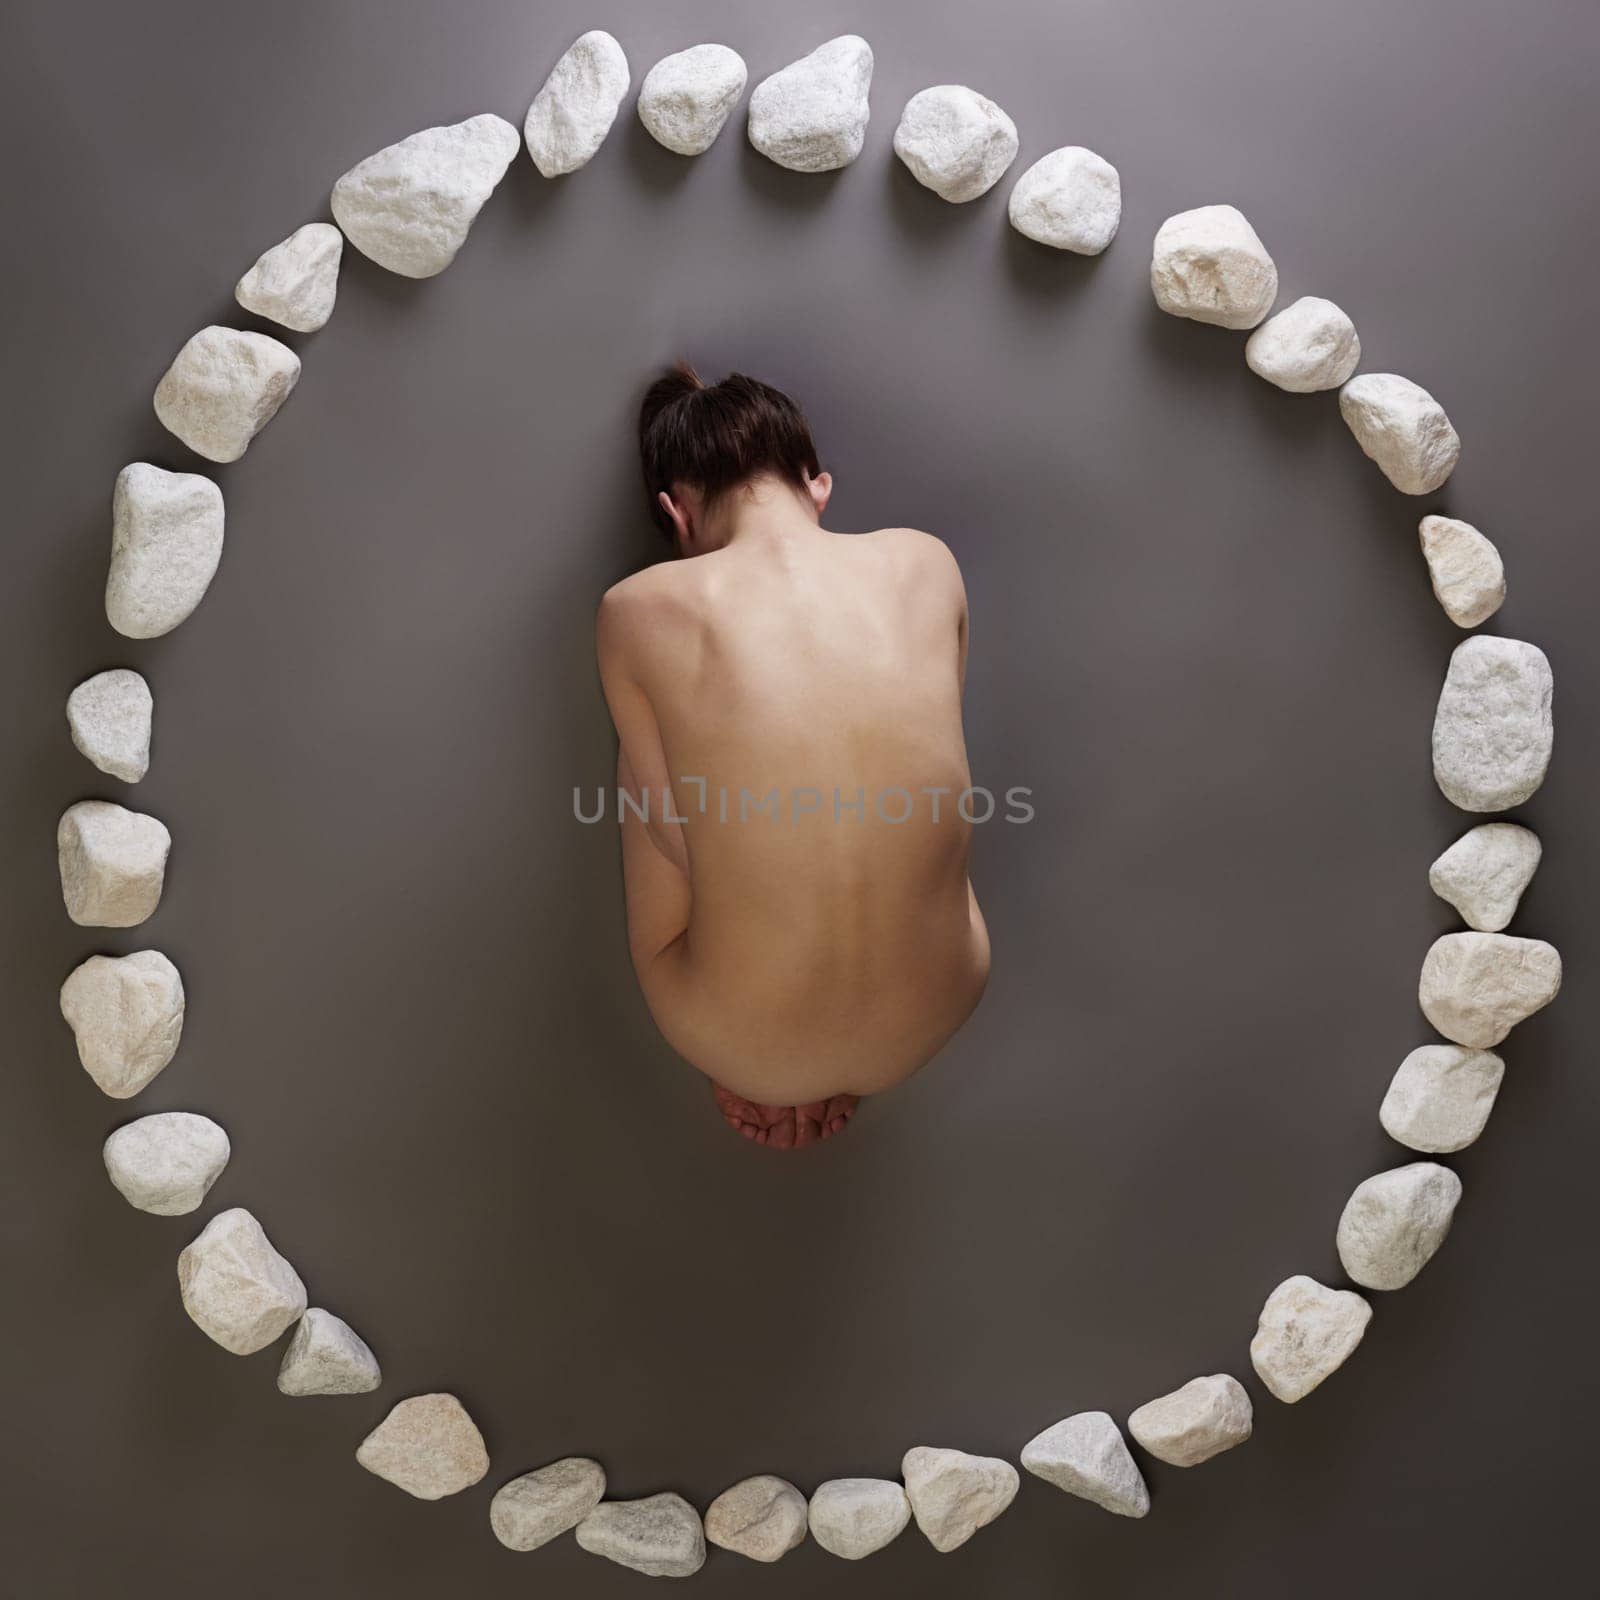 Bare woman posing lying in circle of stones. Top view